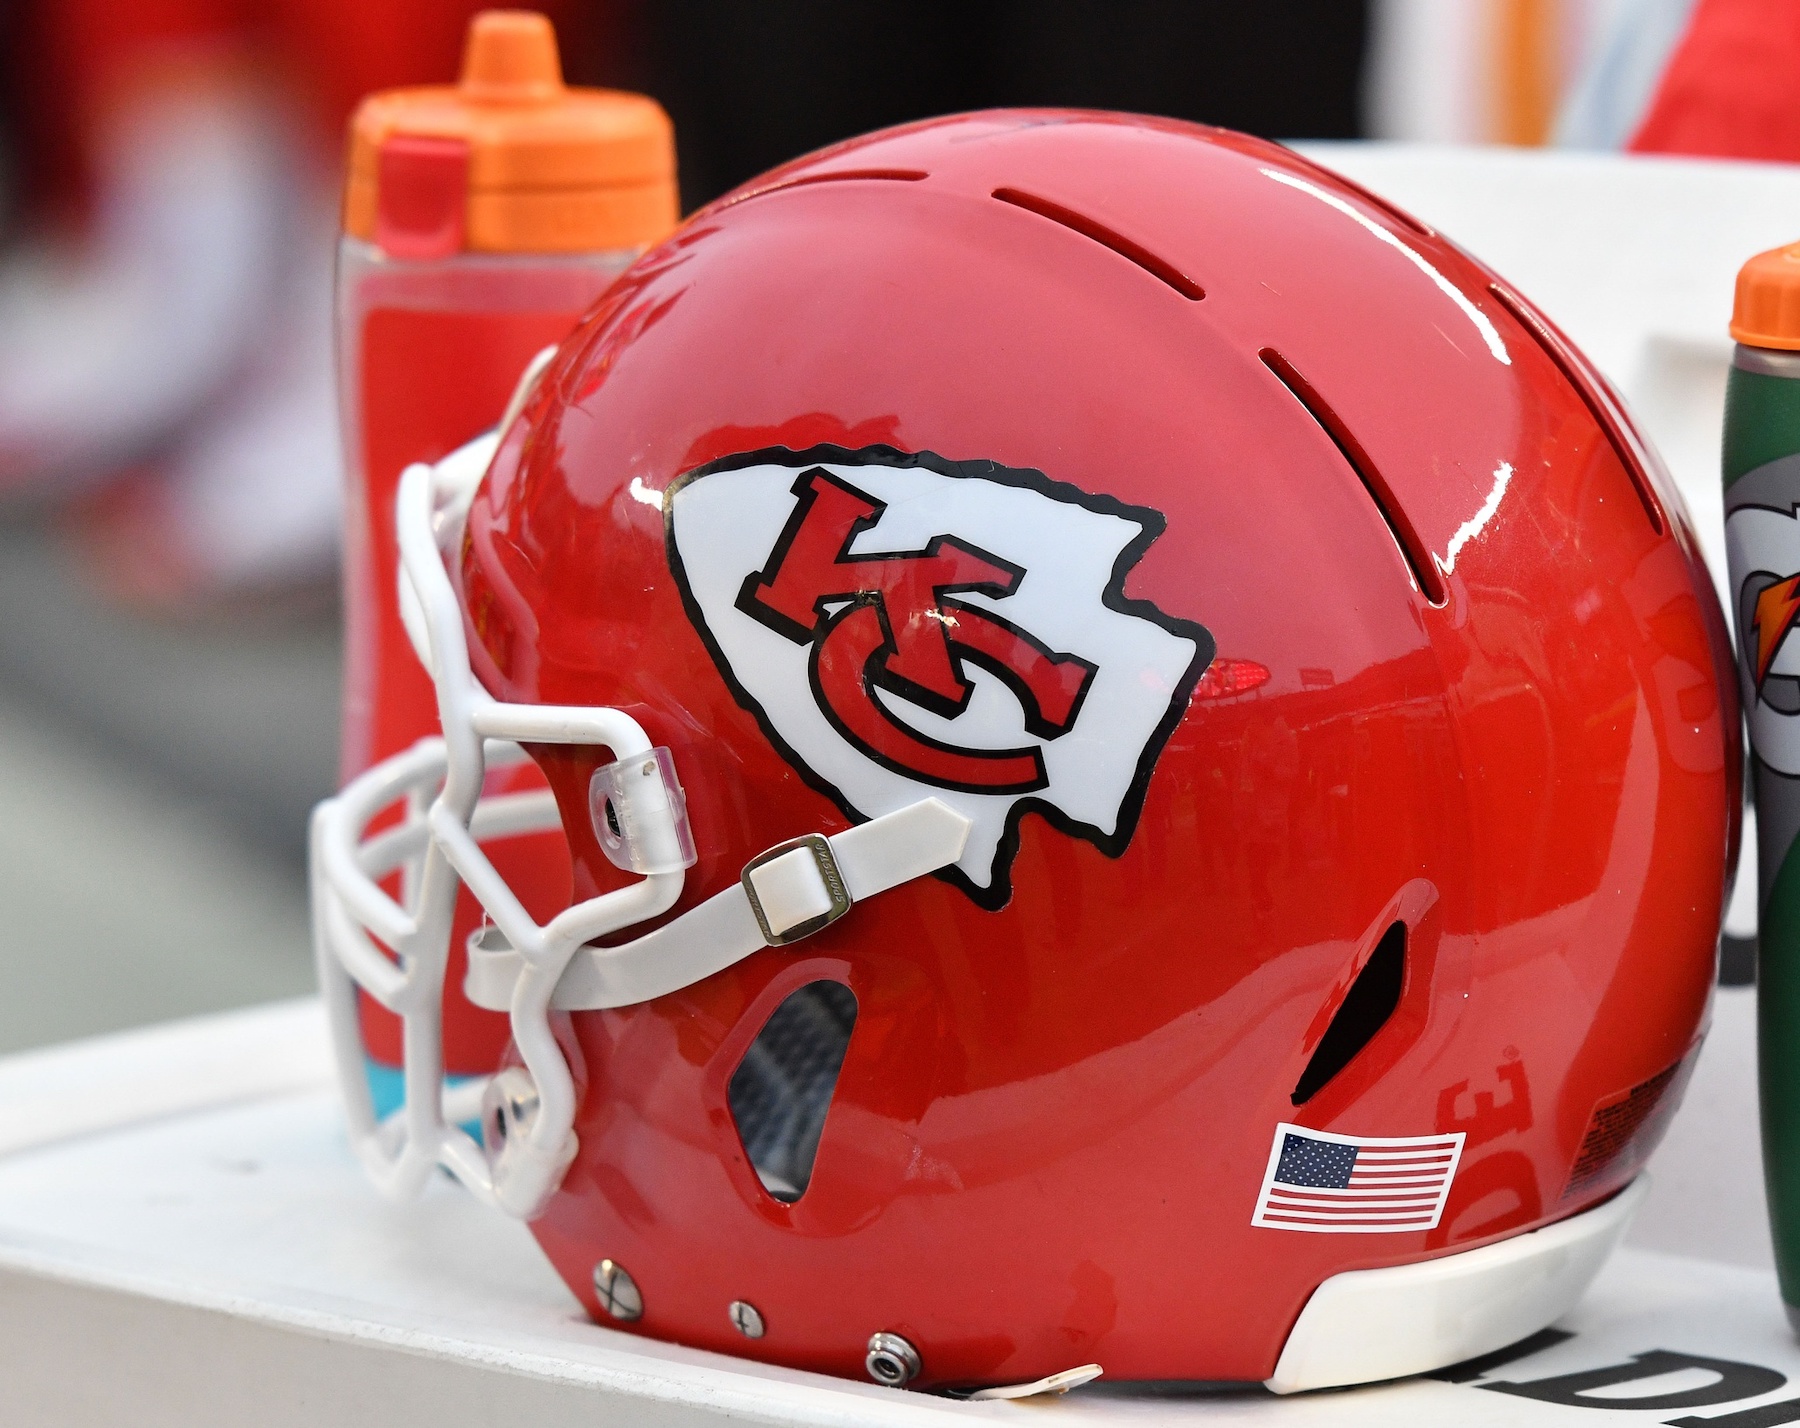 Chiefs Place S Armani Watts on Physically Unable to Perform List